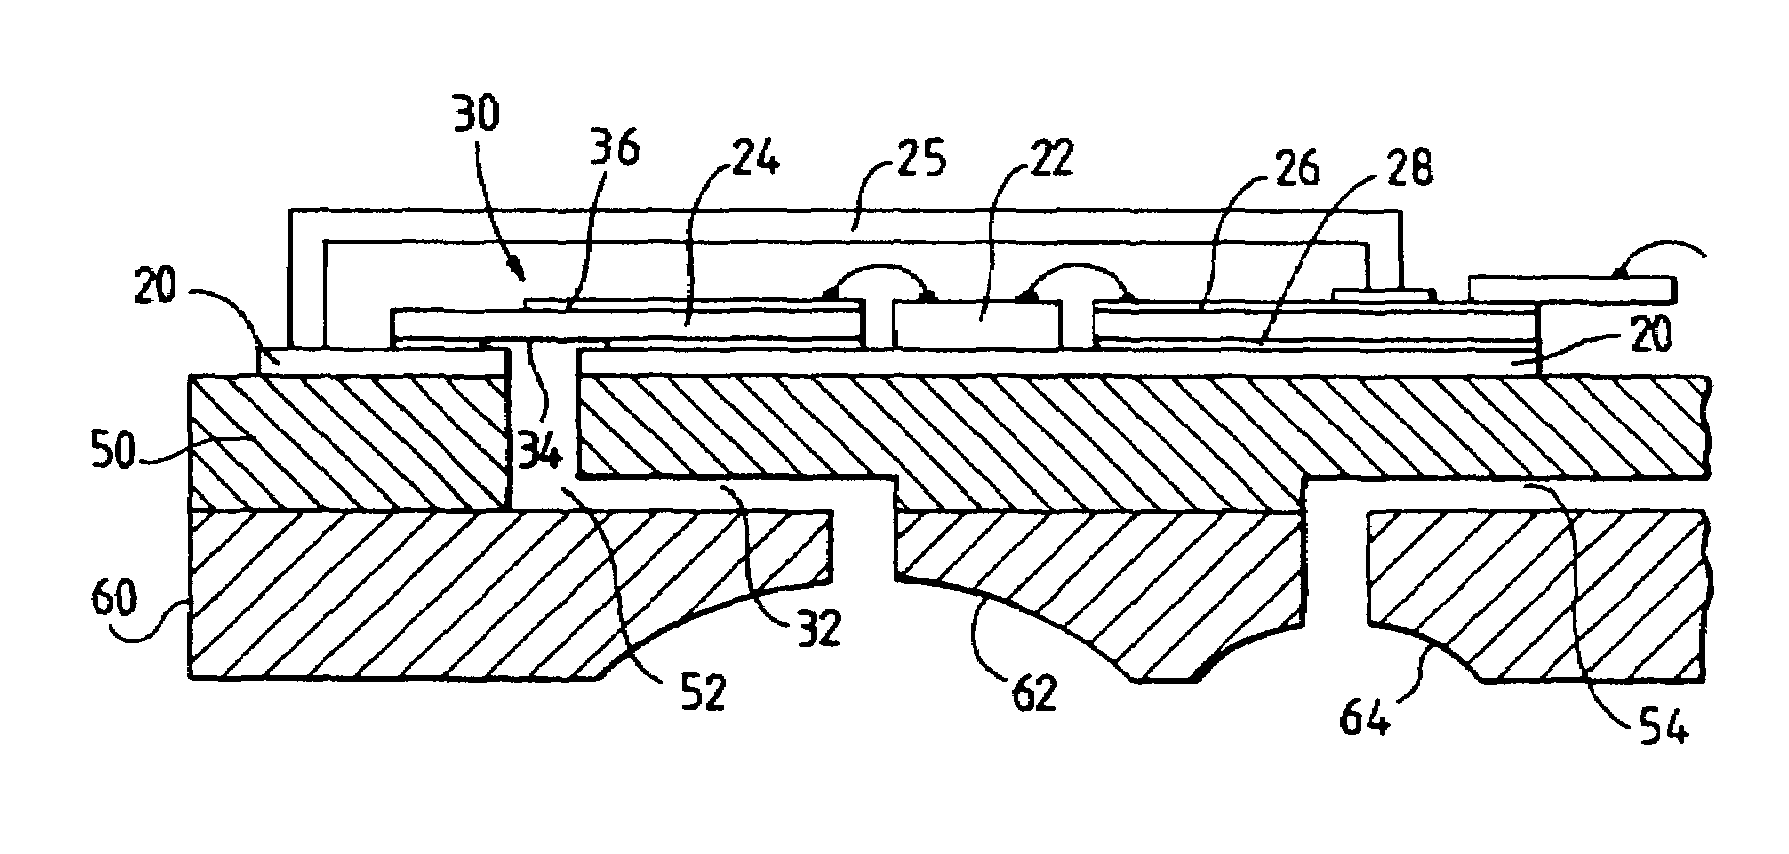 Packaged electronic components for producing a sub-harmonic frequency signal at millimetric frequencies